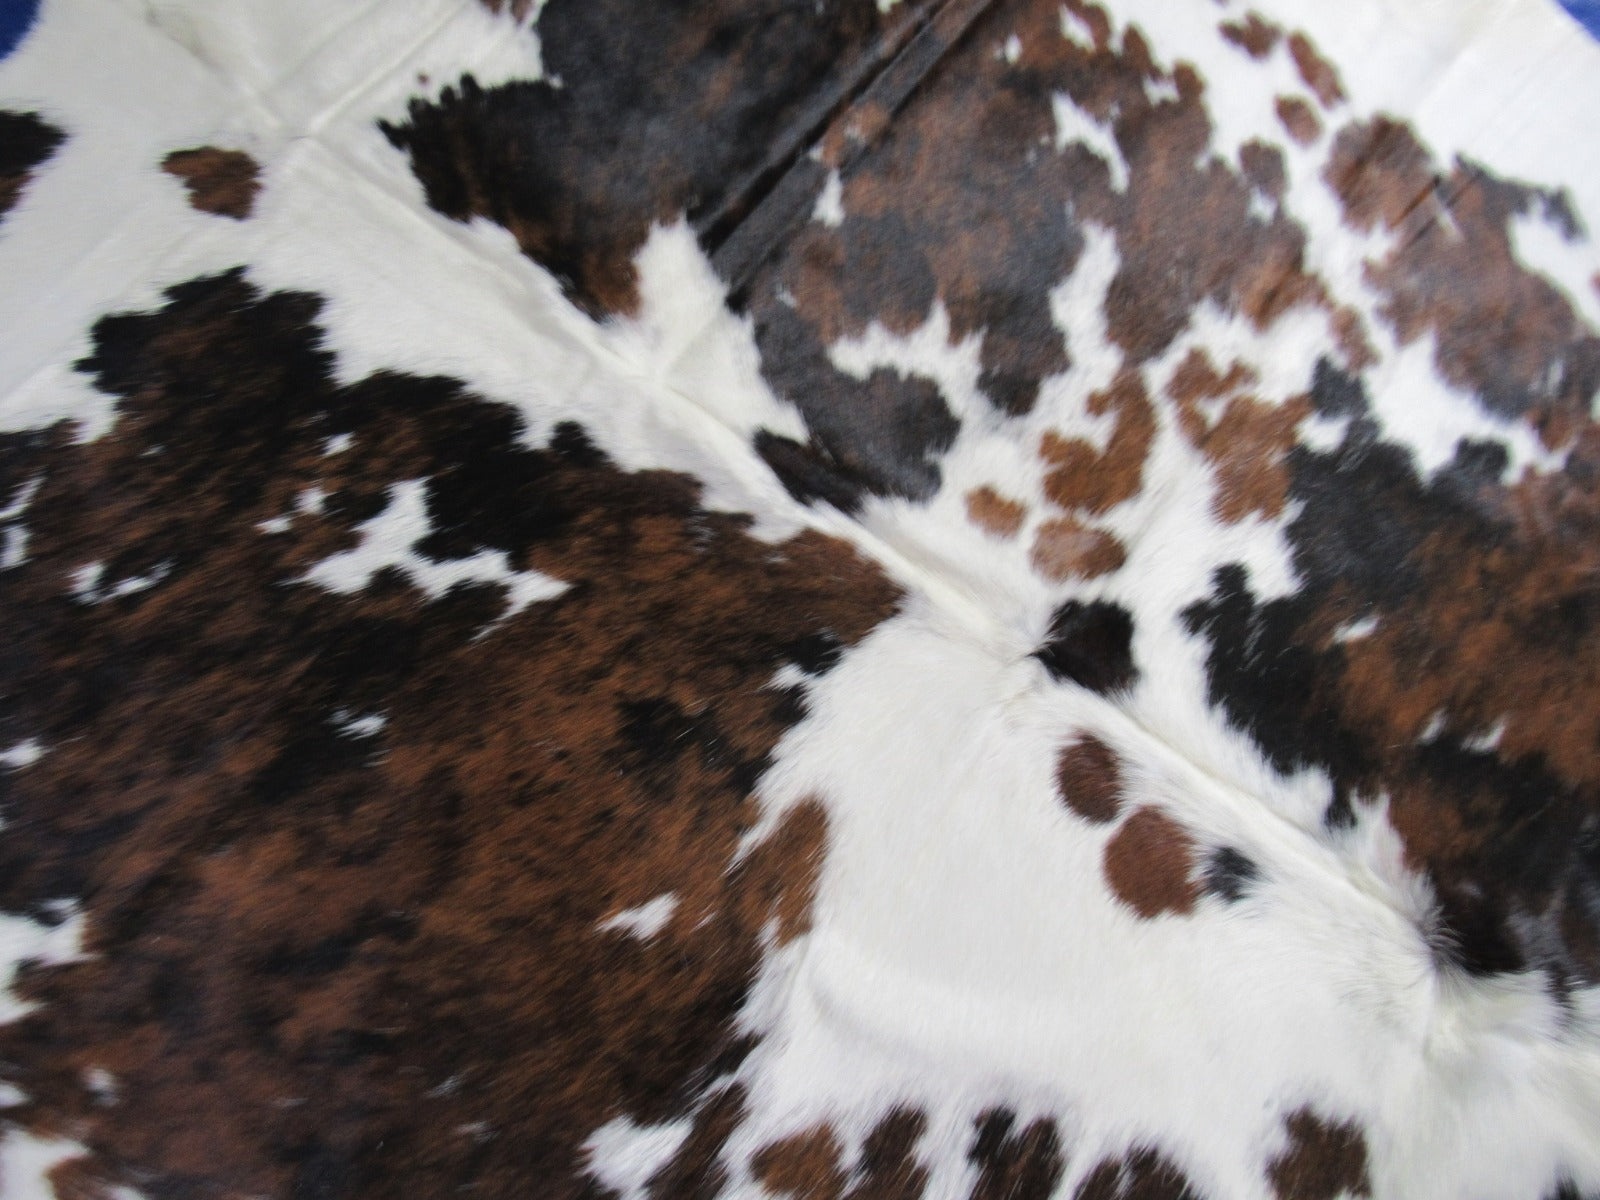 Tricolor Speckled Cowhide Rug - Size: 7x6.5 feet K-342